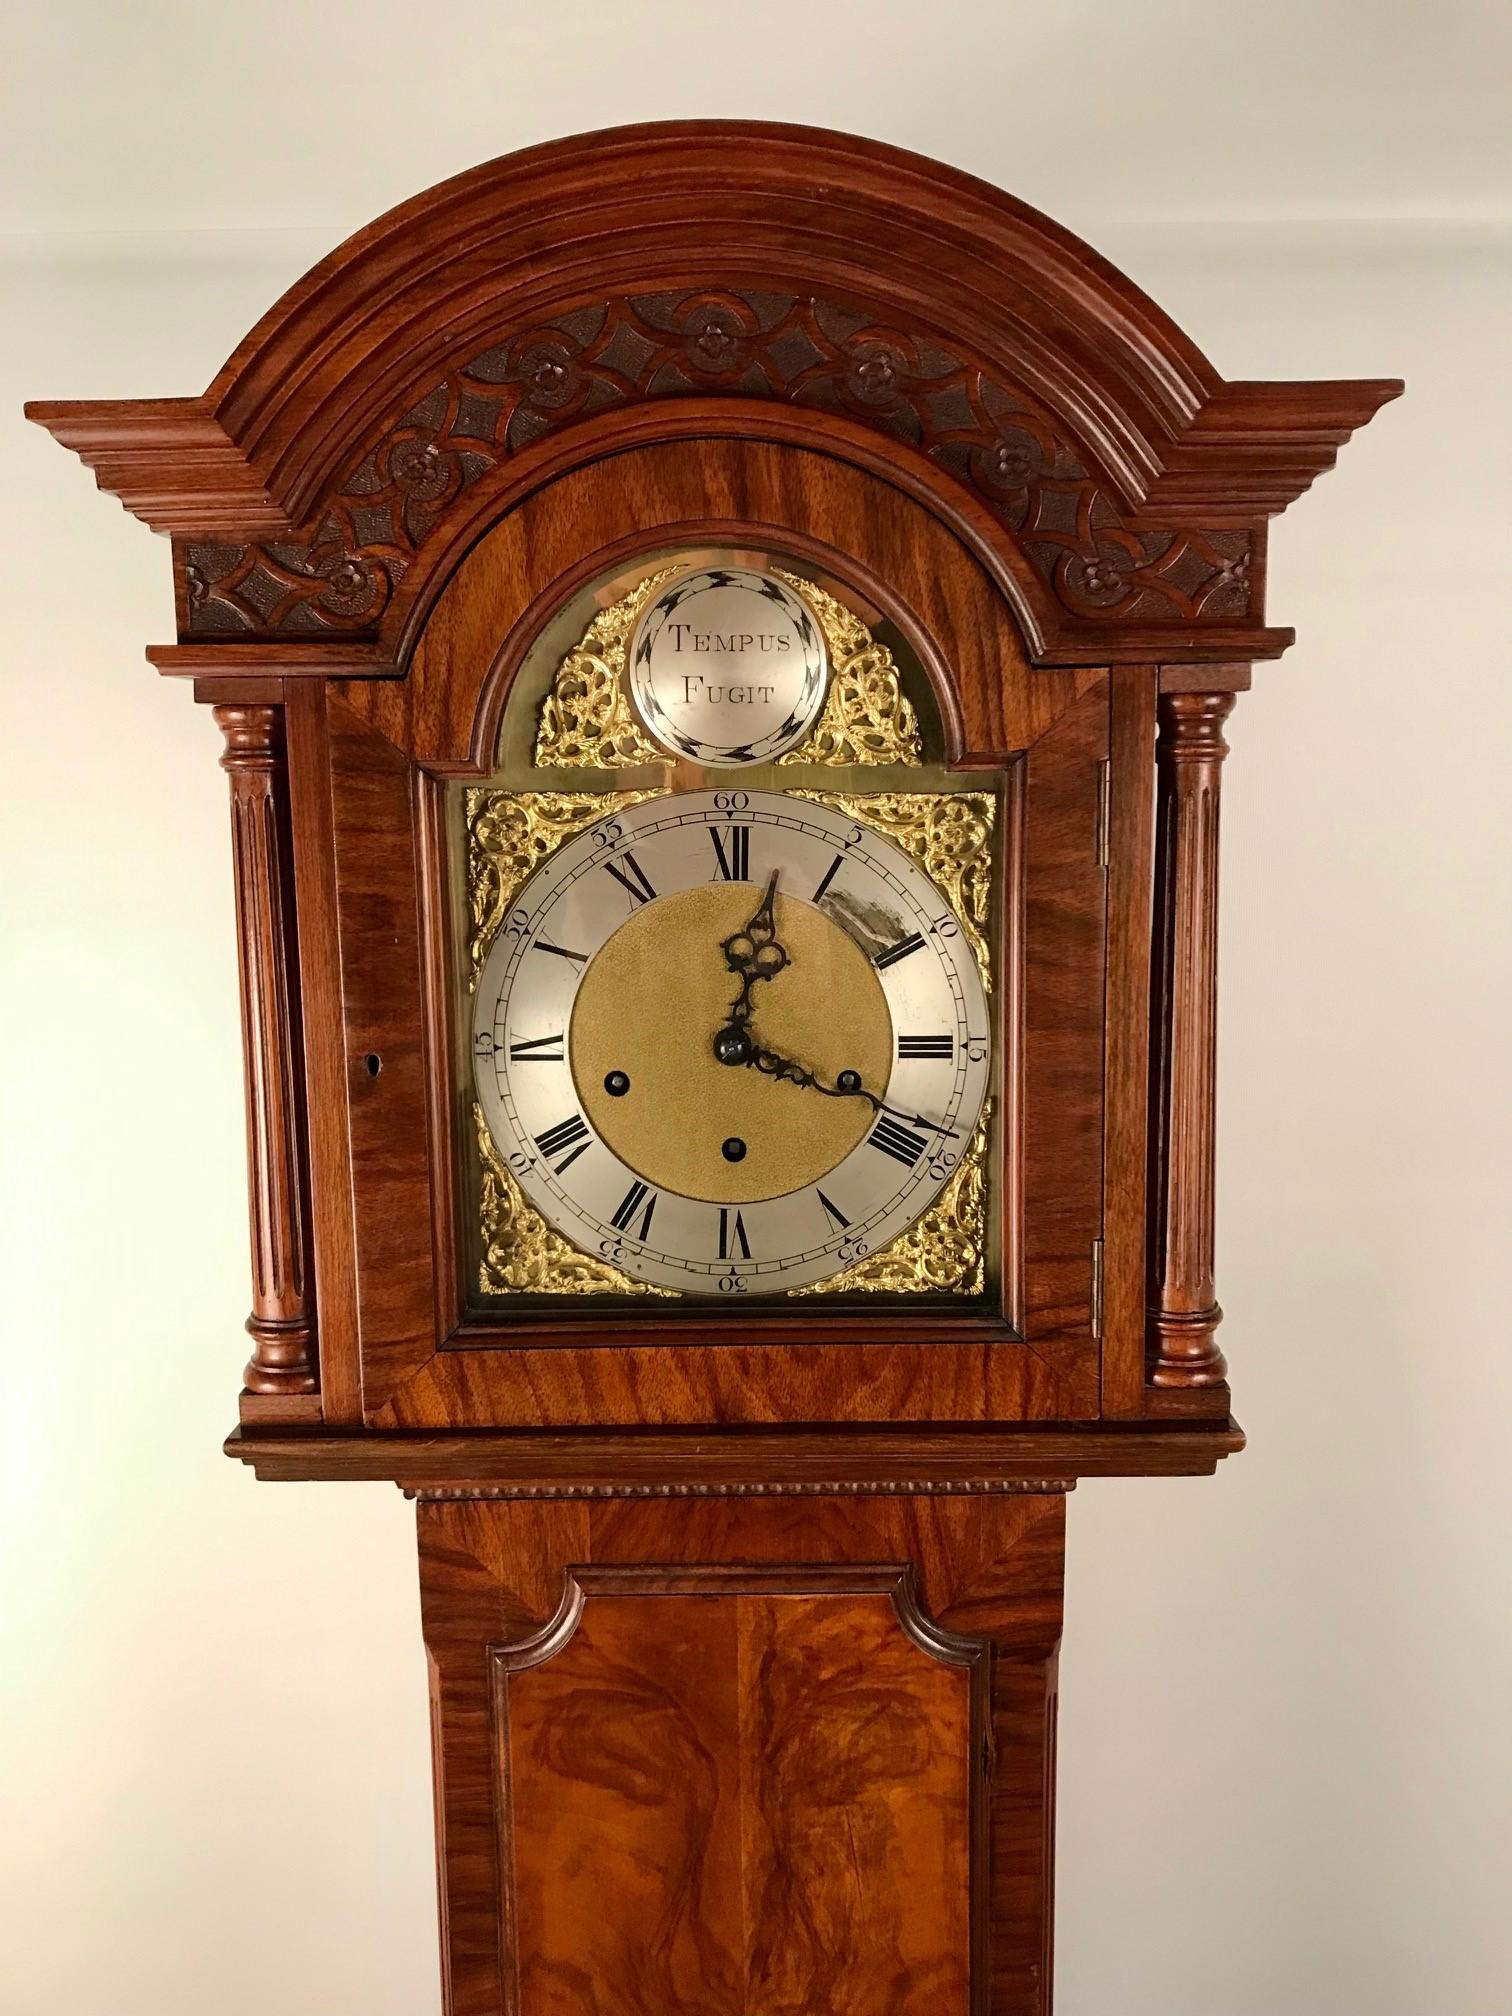 Hand-Crafted Westminster Chiming Grandmother Clock in a Mahogany Case For Sale